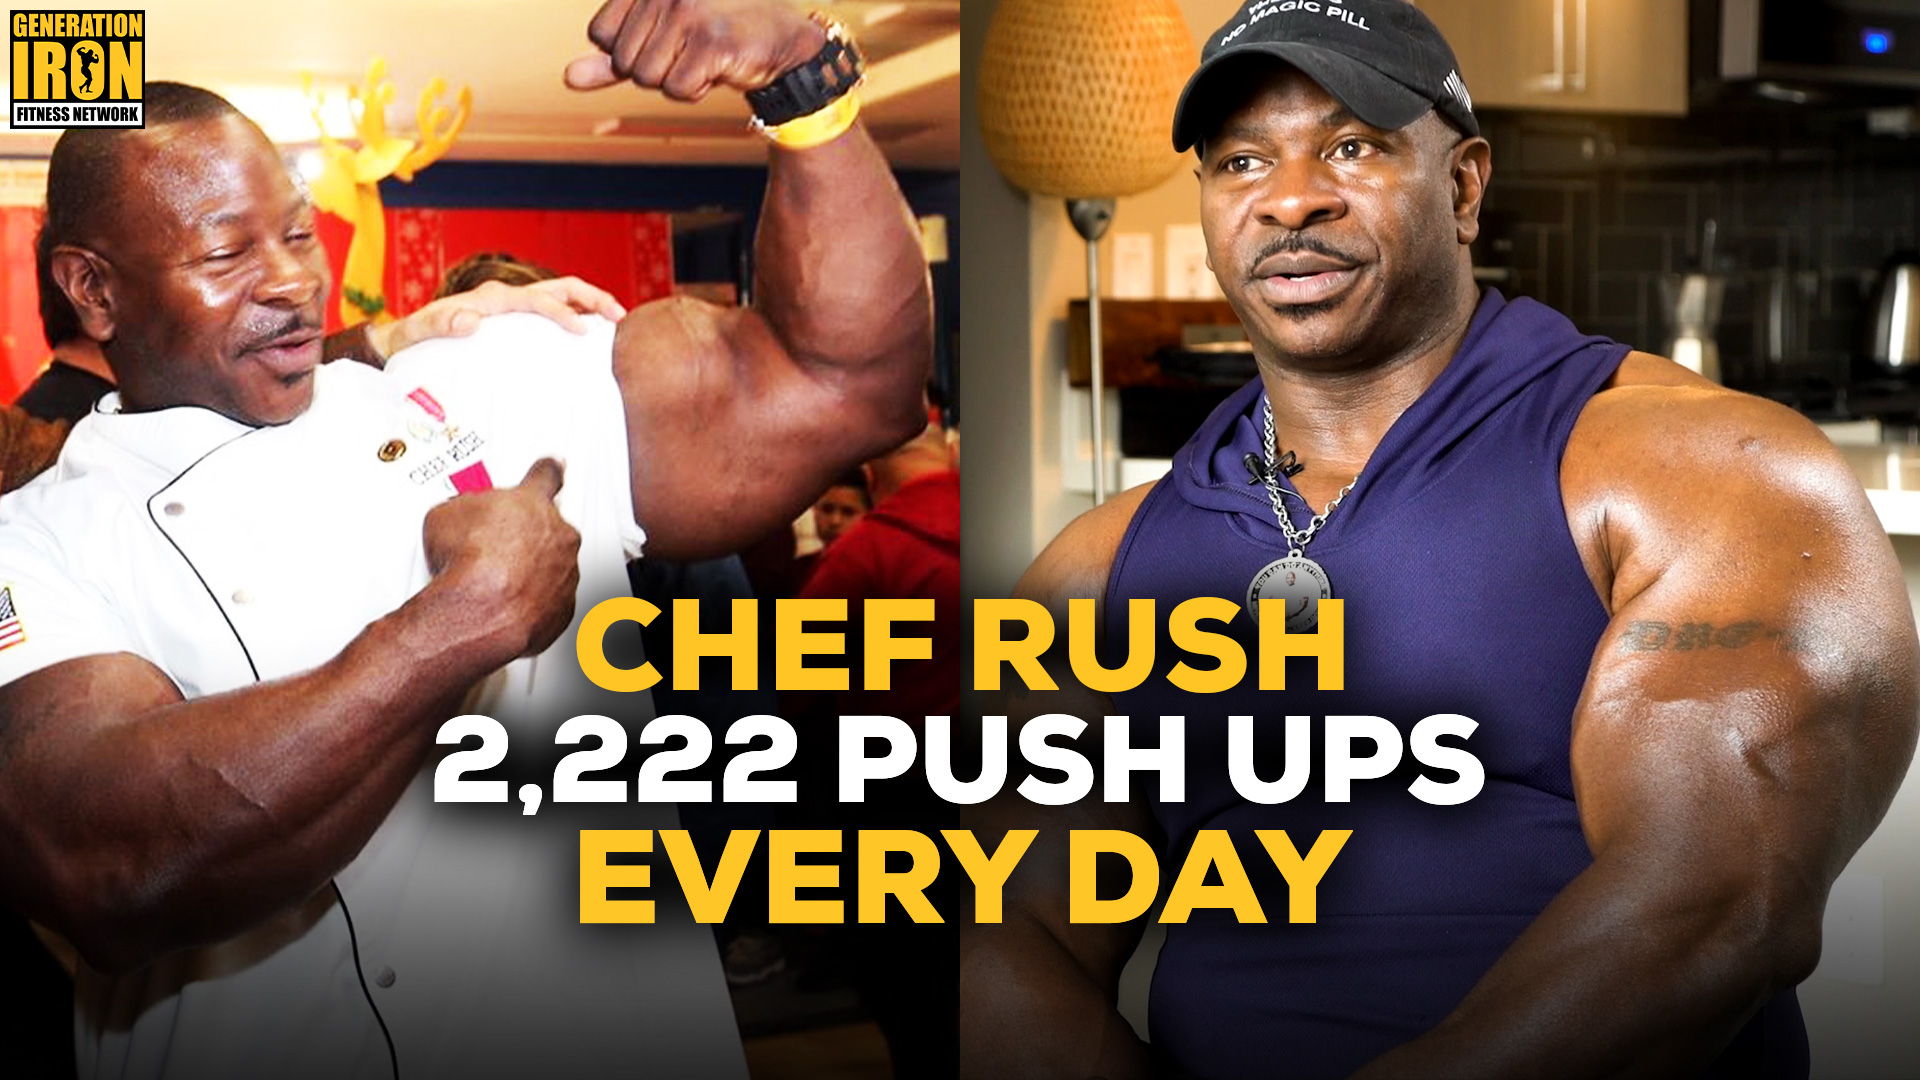 chef andre rush meal plan